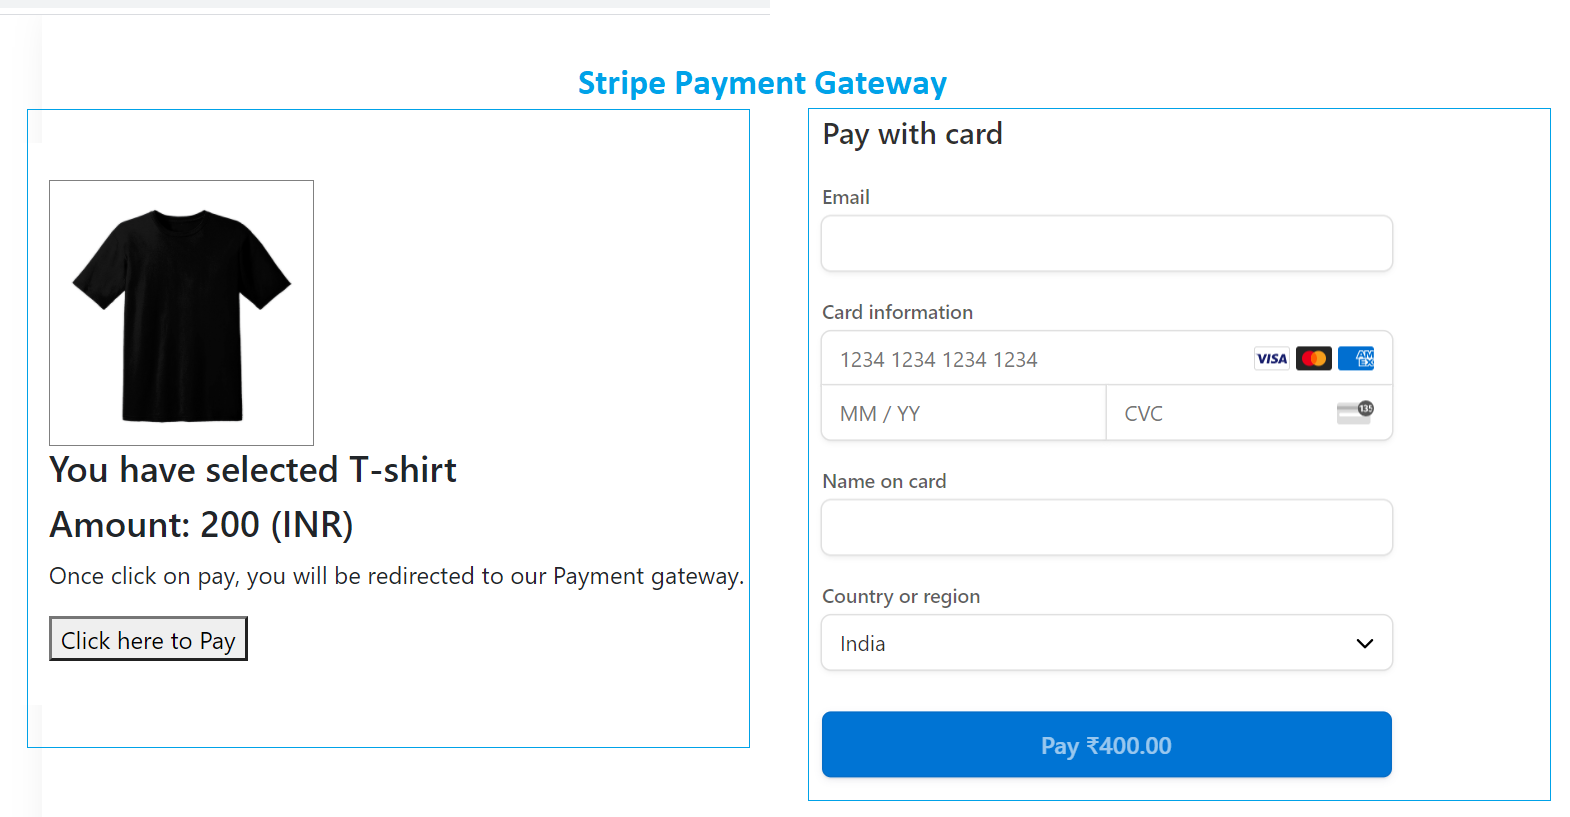 Integrating Stripe Payments into Your React Application